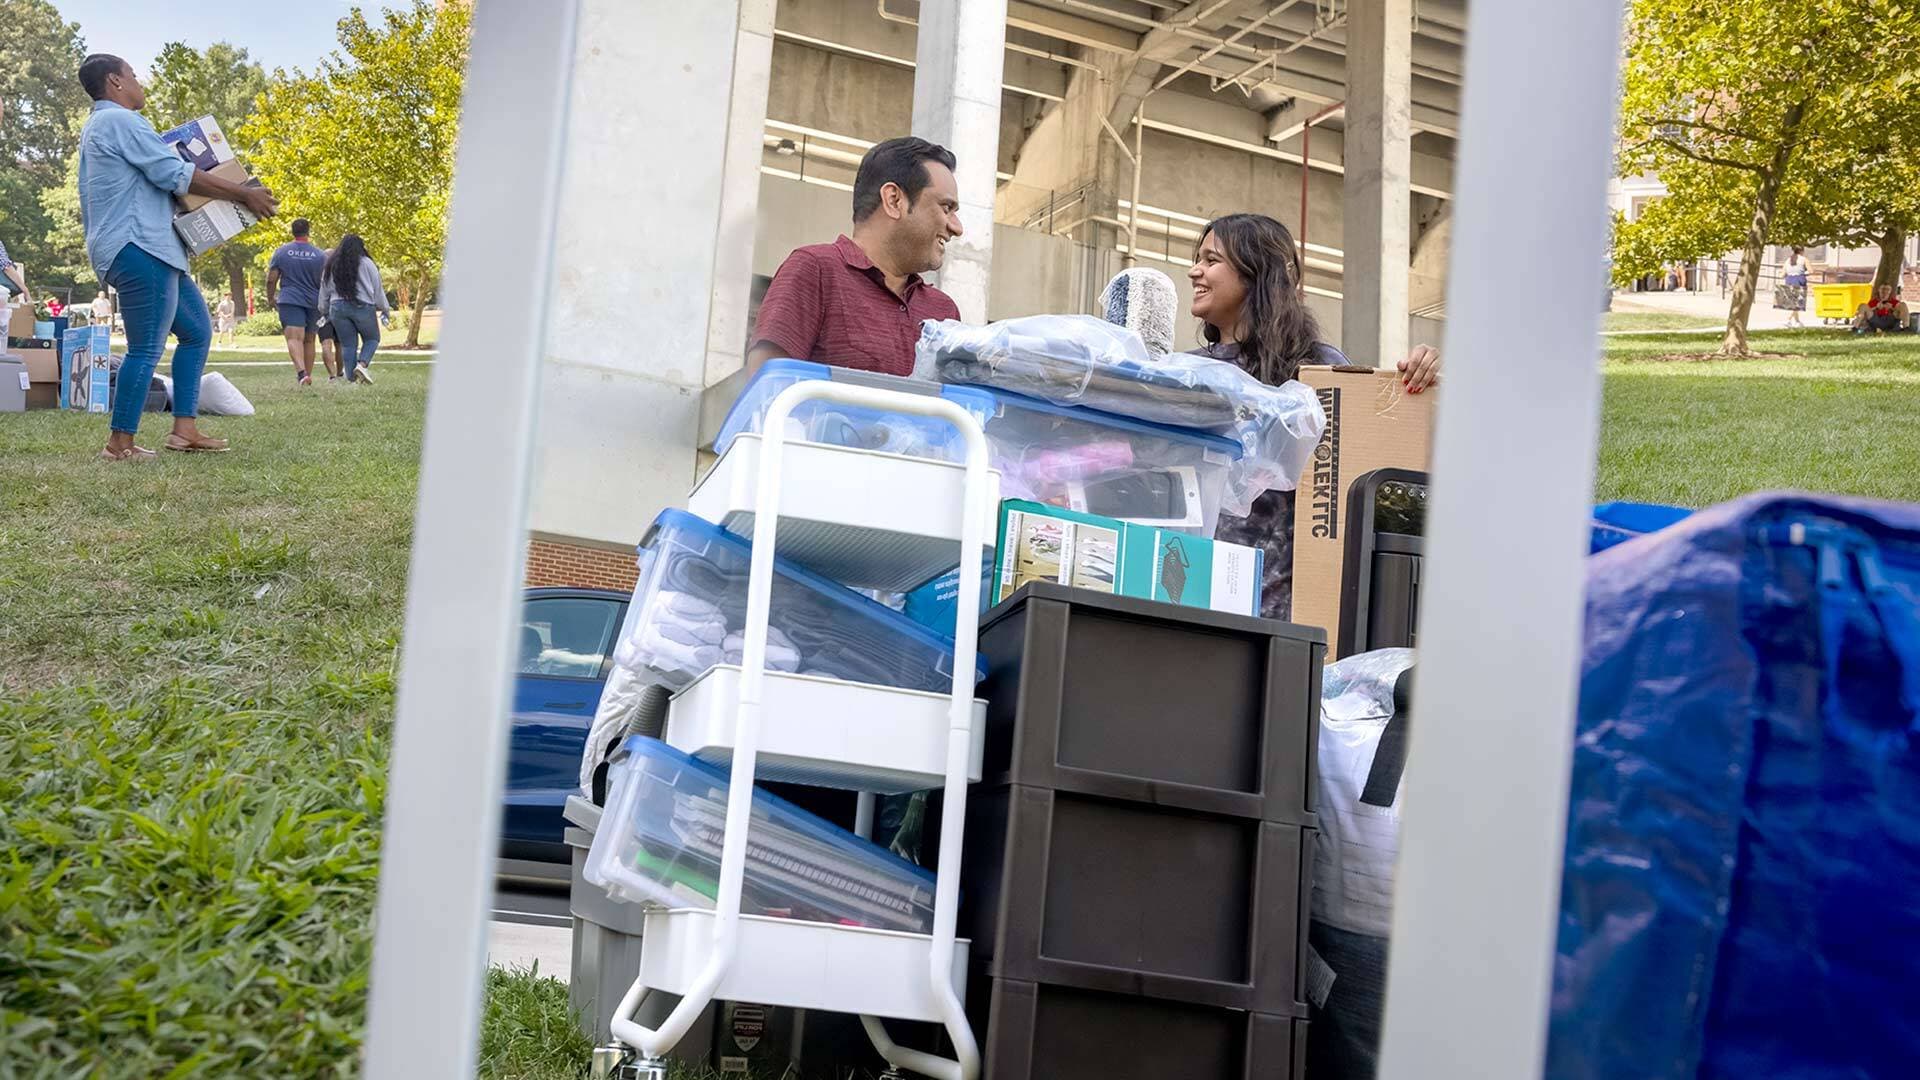 father and daughter stand near giant pile of possessions, preparing to move into a dorm